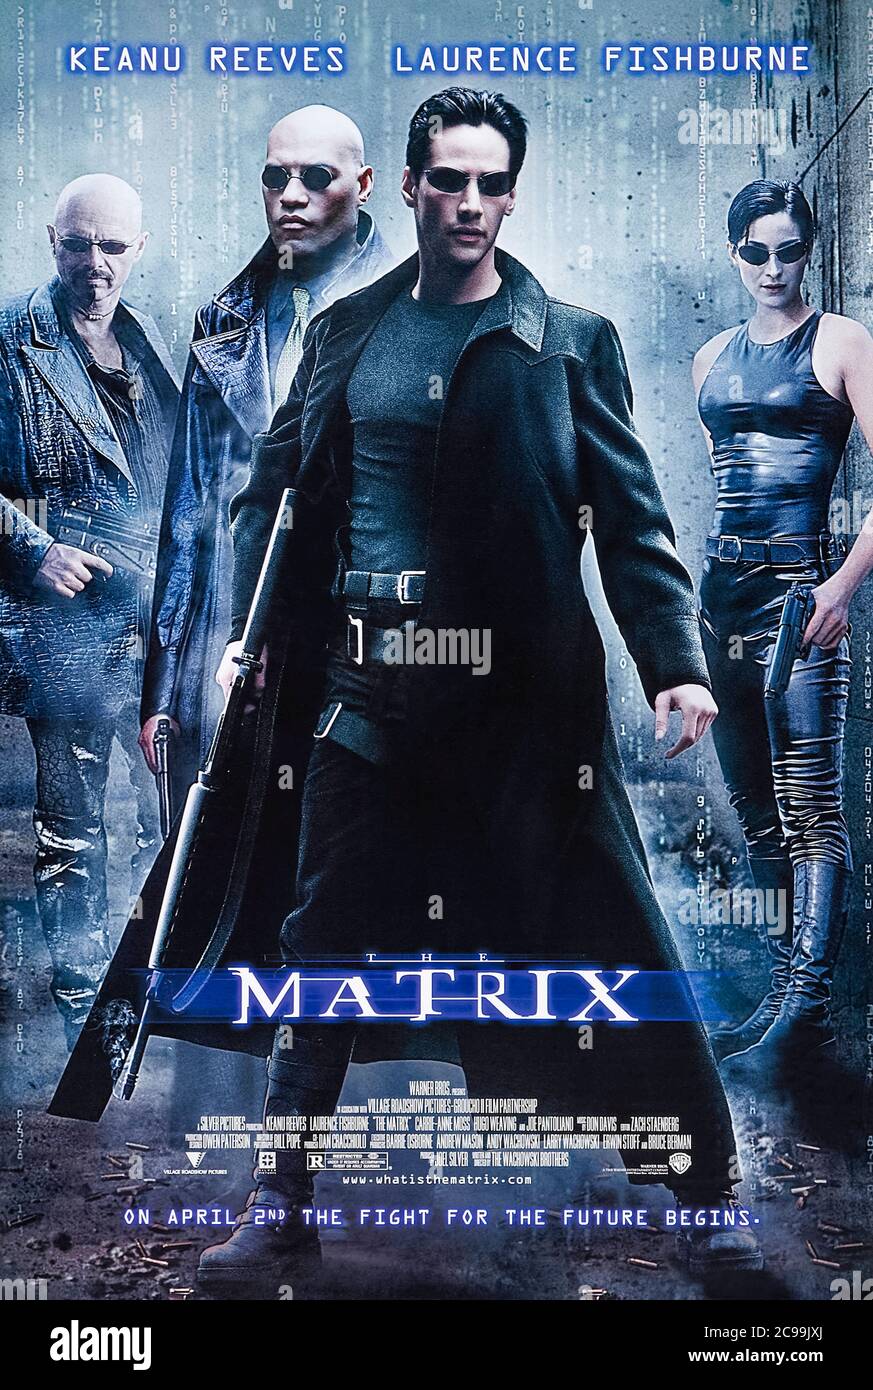 The Matrix (1999) directed by The Wachowski Brothers and starring Keanu Reeves, Laurence Fishburne, Carrie-Anne Moss and Joe Pantoliano. A computer hacker finds the rabbit hole is deeper than he possibly imagined when he elects to take the red pill in this groundbreaking and innovative Science Fiction classic. Stock Photo